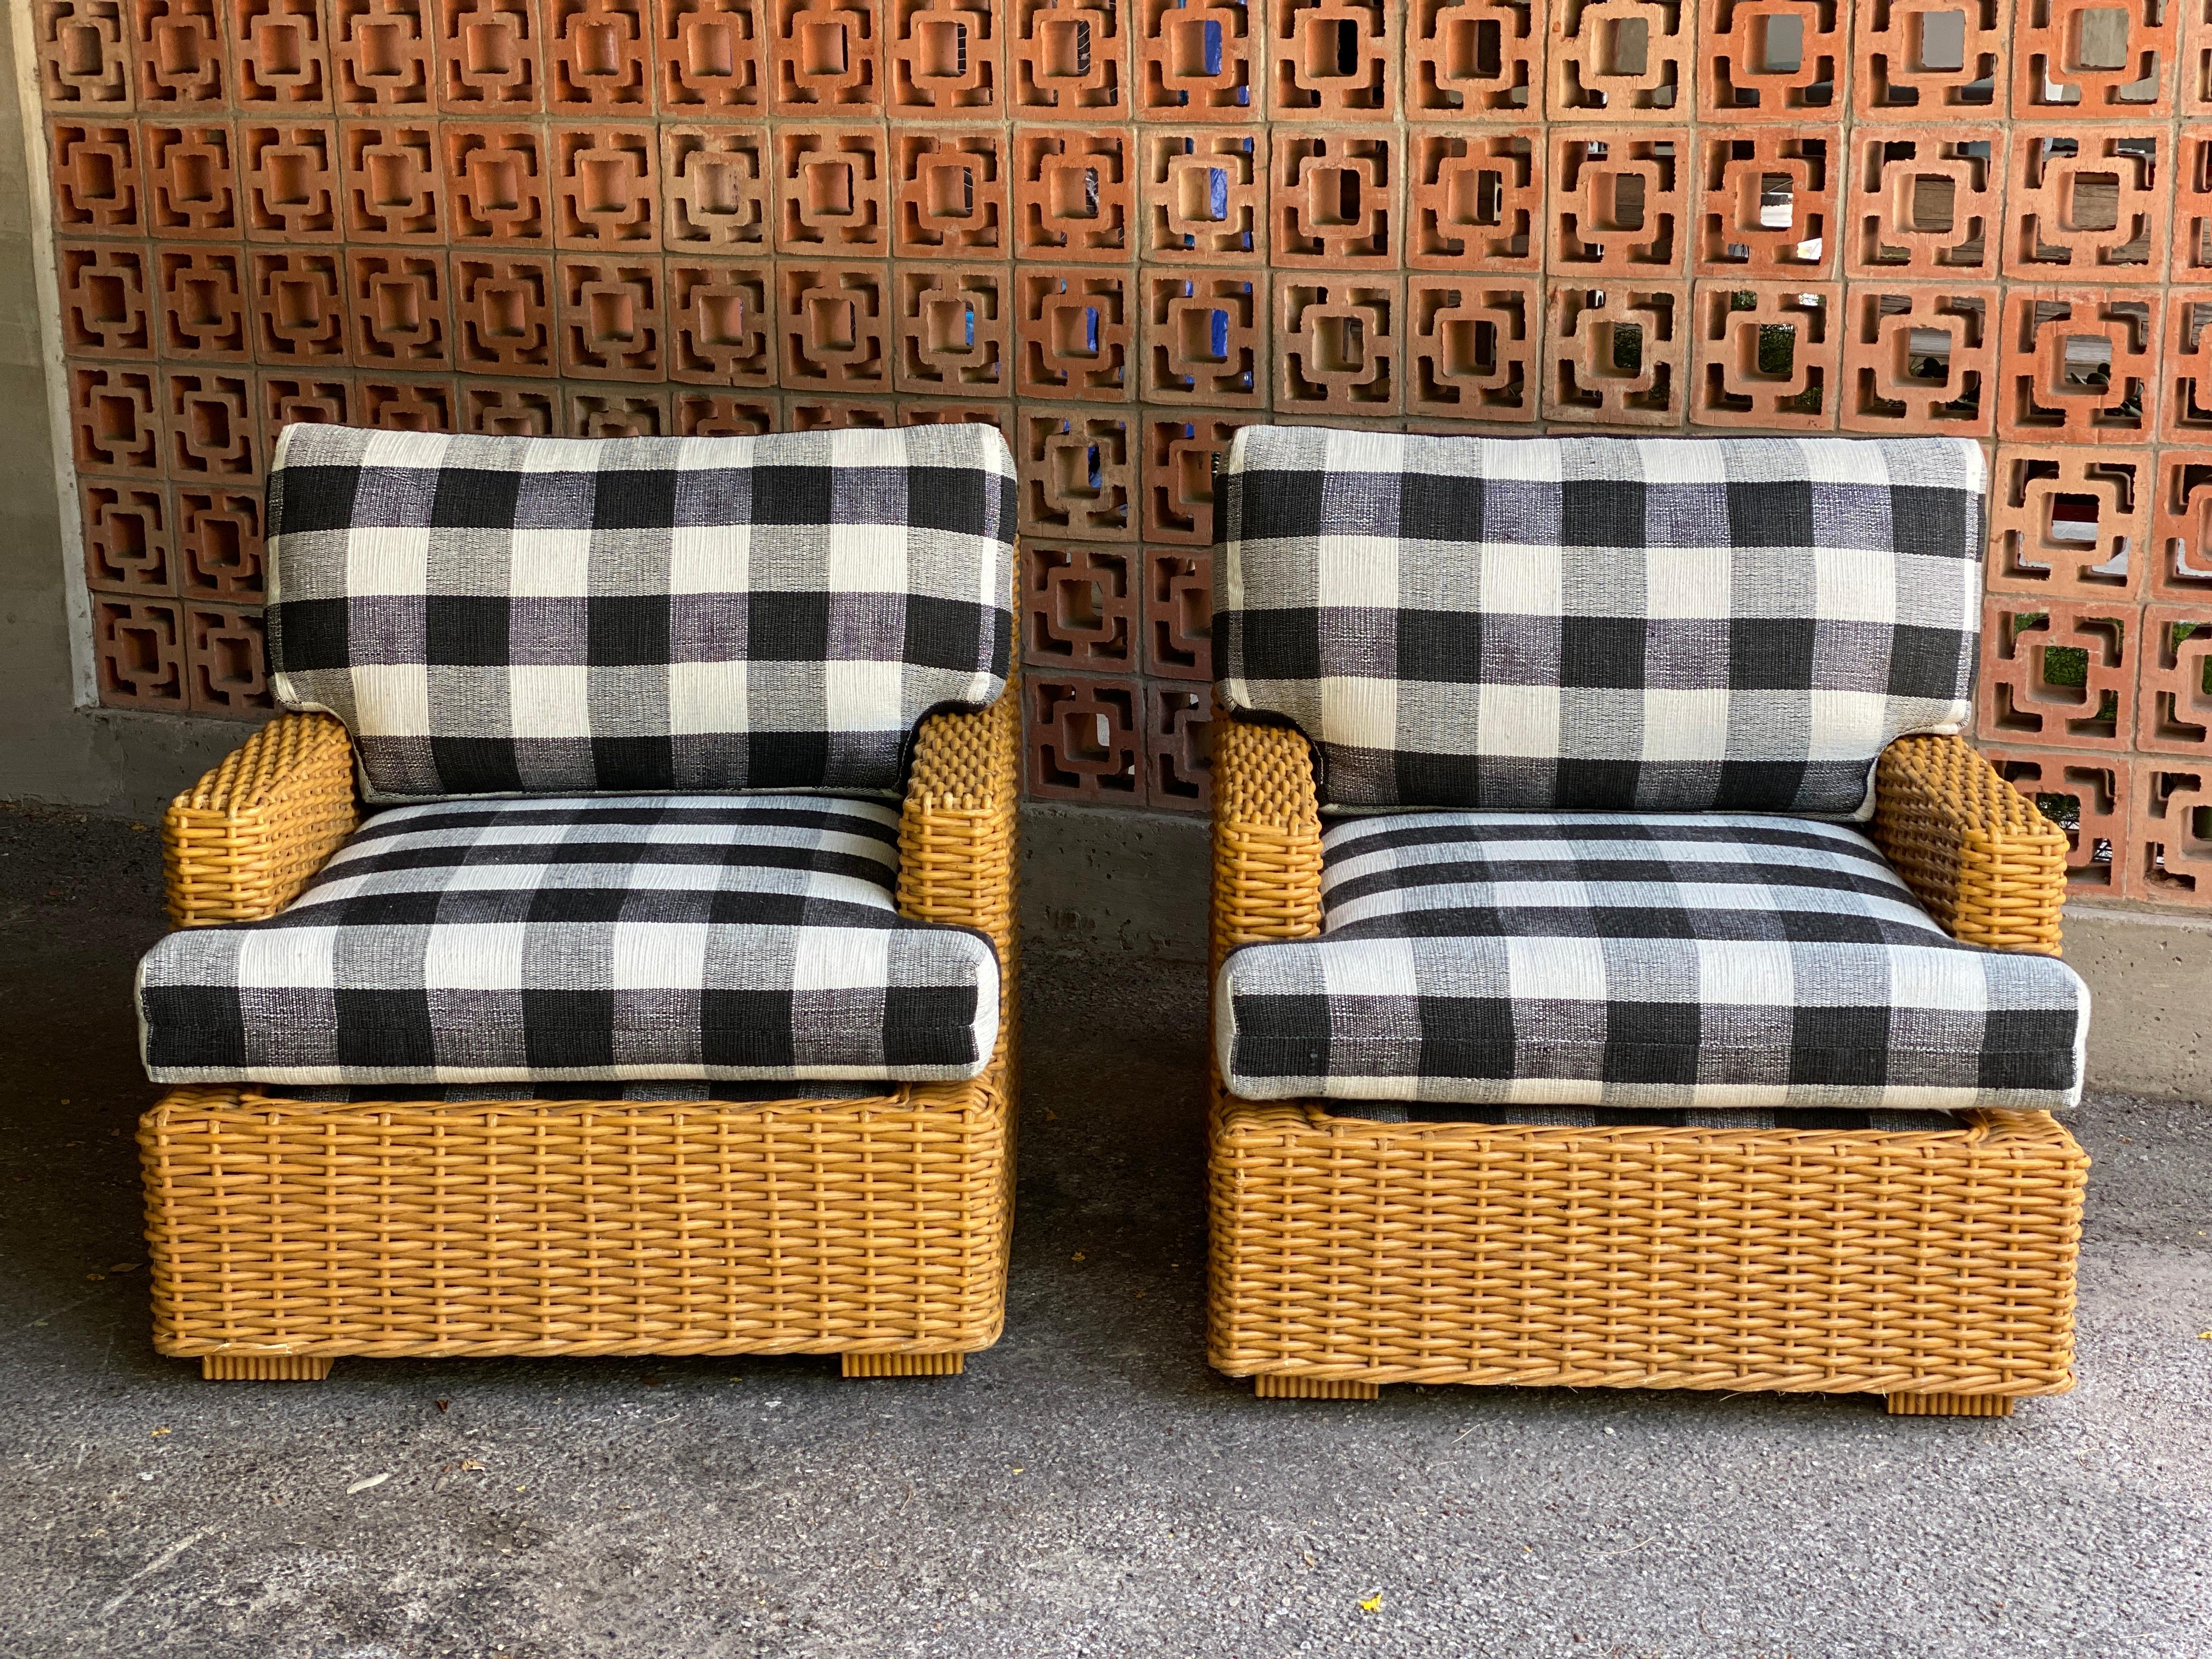 Vintage wicker lounge chairs with newly upholstered seat and back cushions in custom, Schumacher black and white check fabric (Barnes Performance Check / Black #77552). Very comfortable and smart looking. 

Triangular side table in pictures also